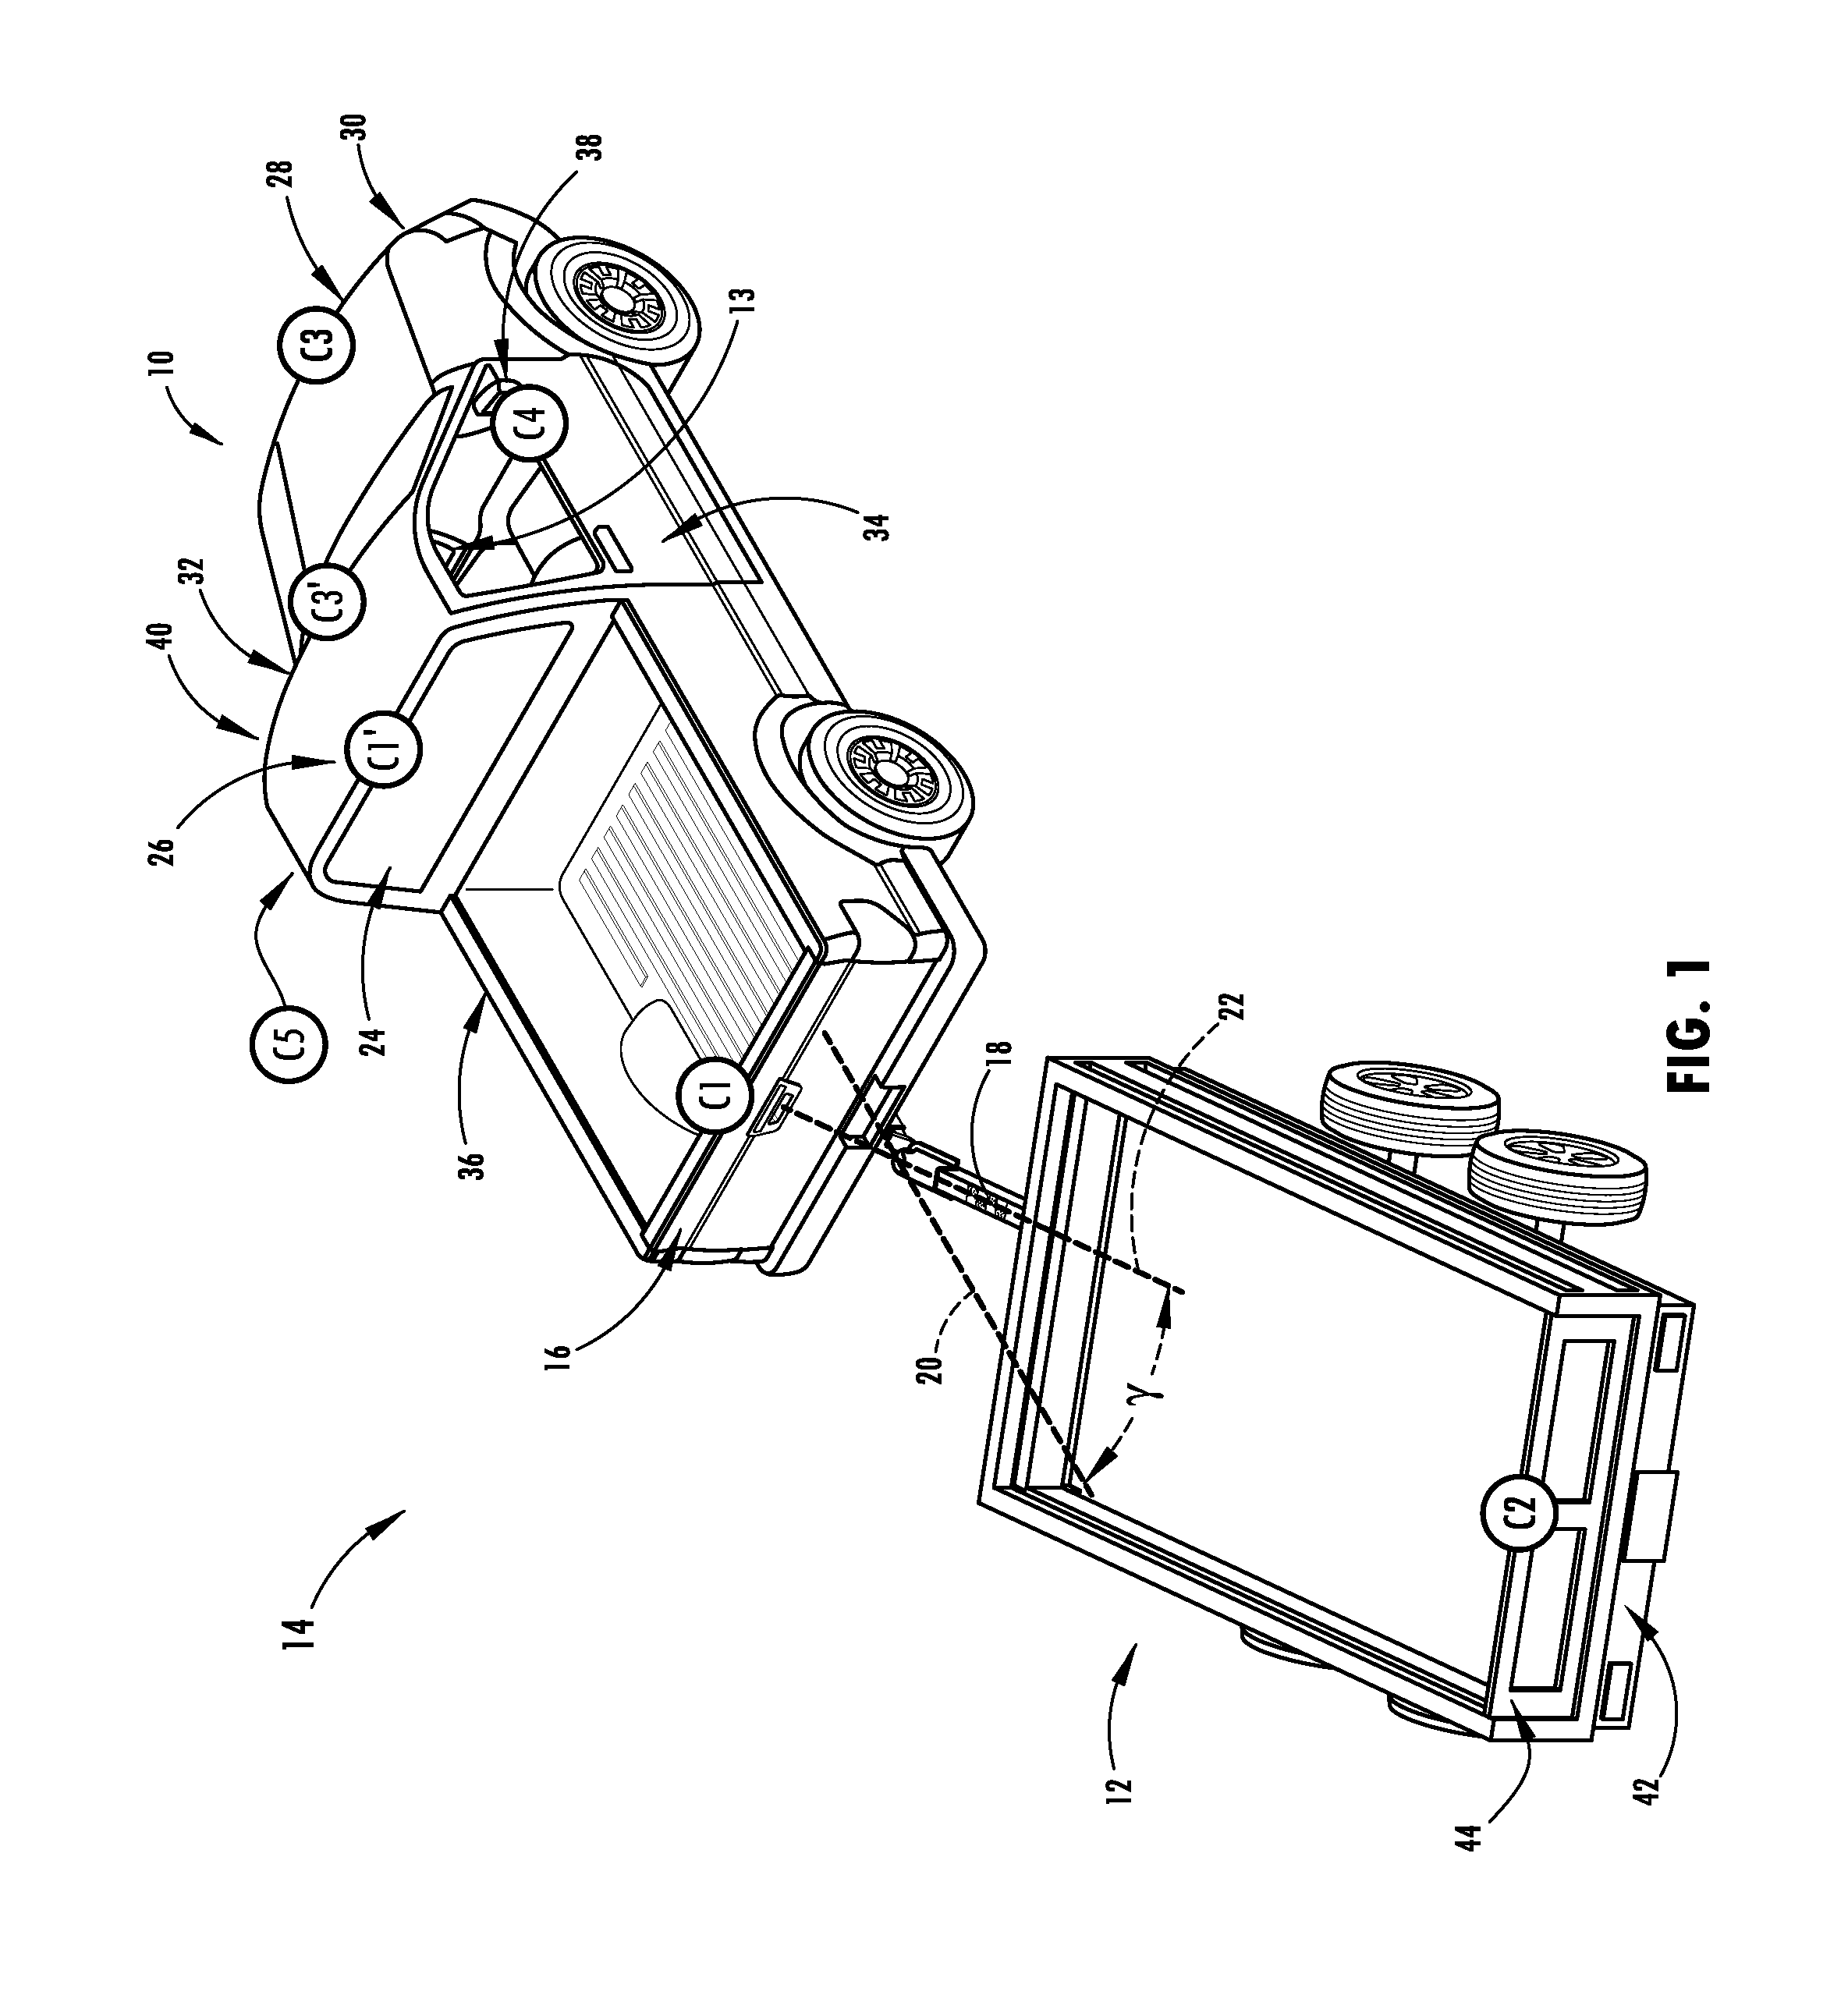 System and method of inputting an intended backing path